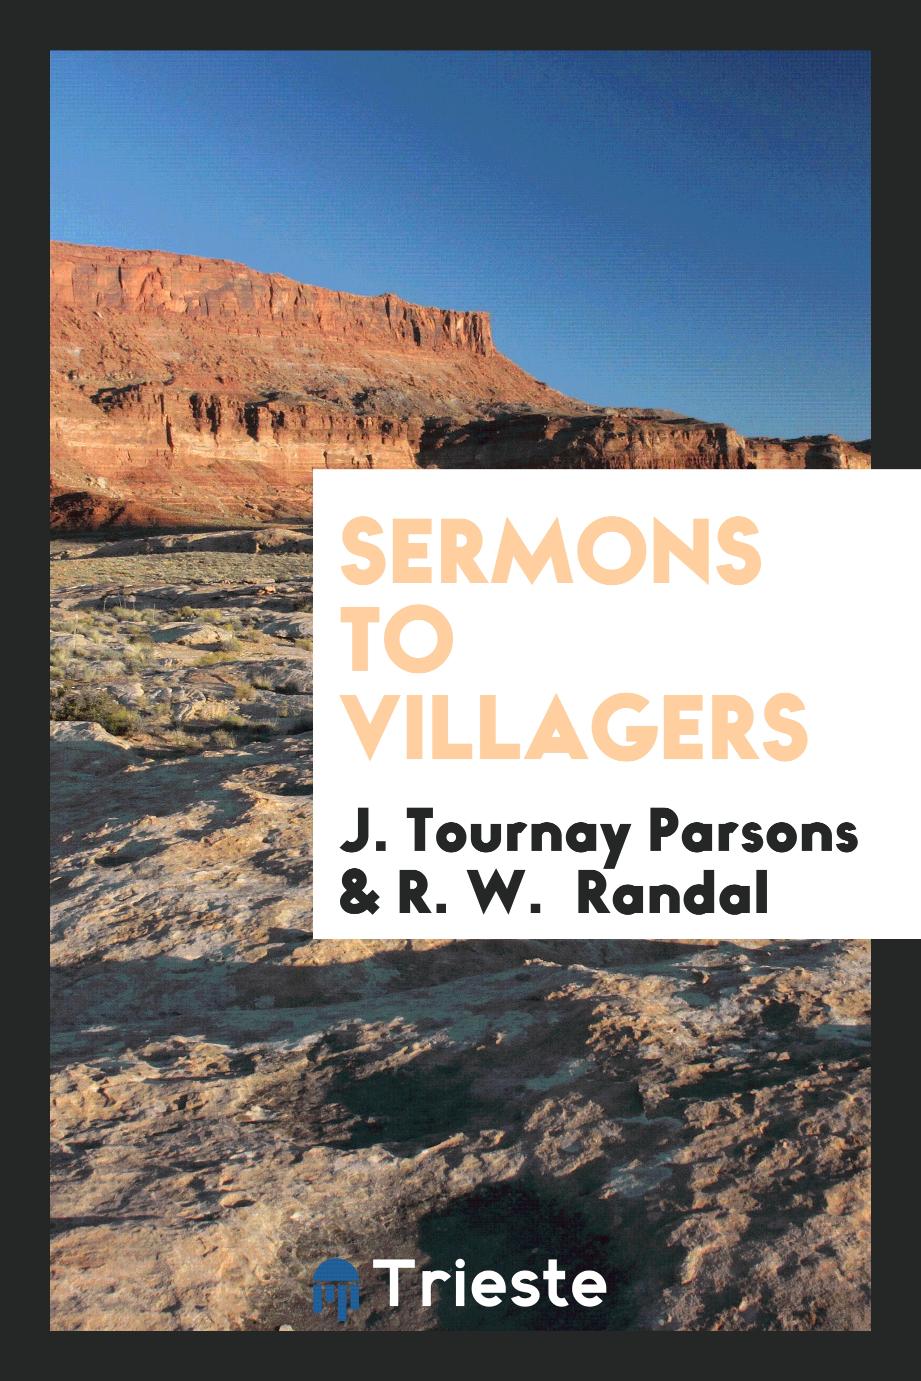 Sermons to Villagers